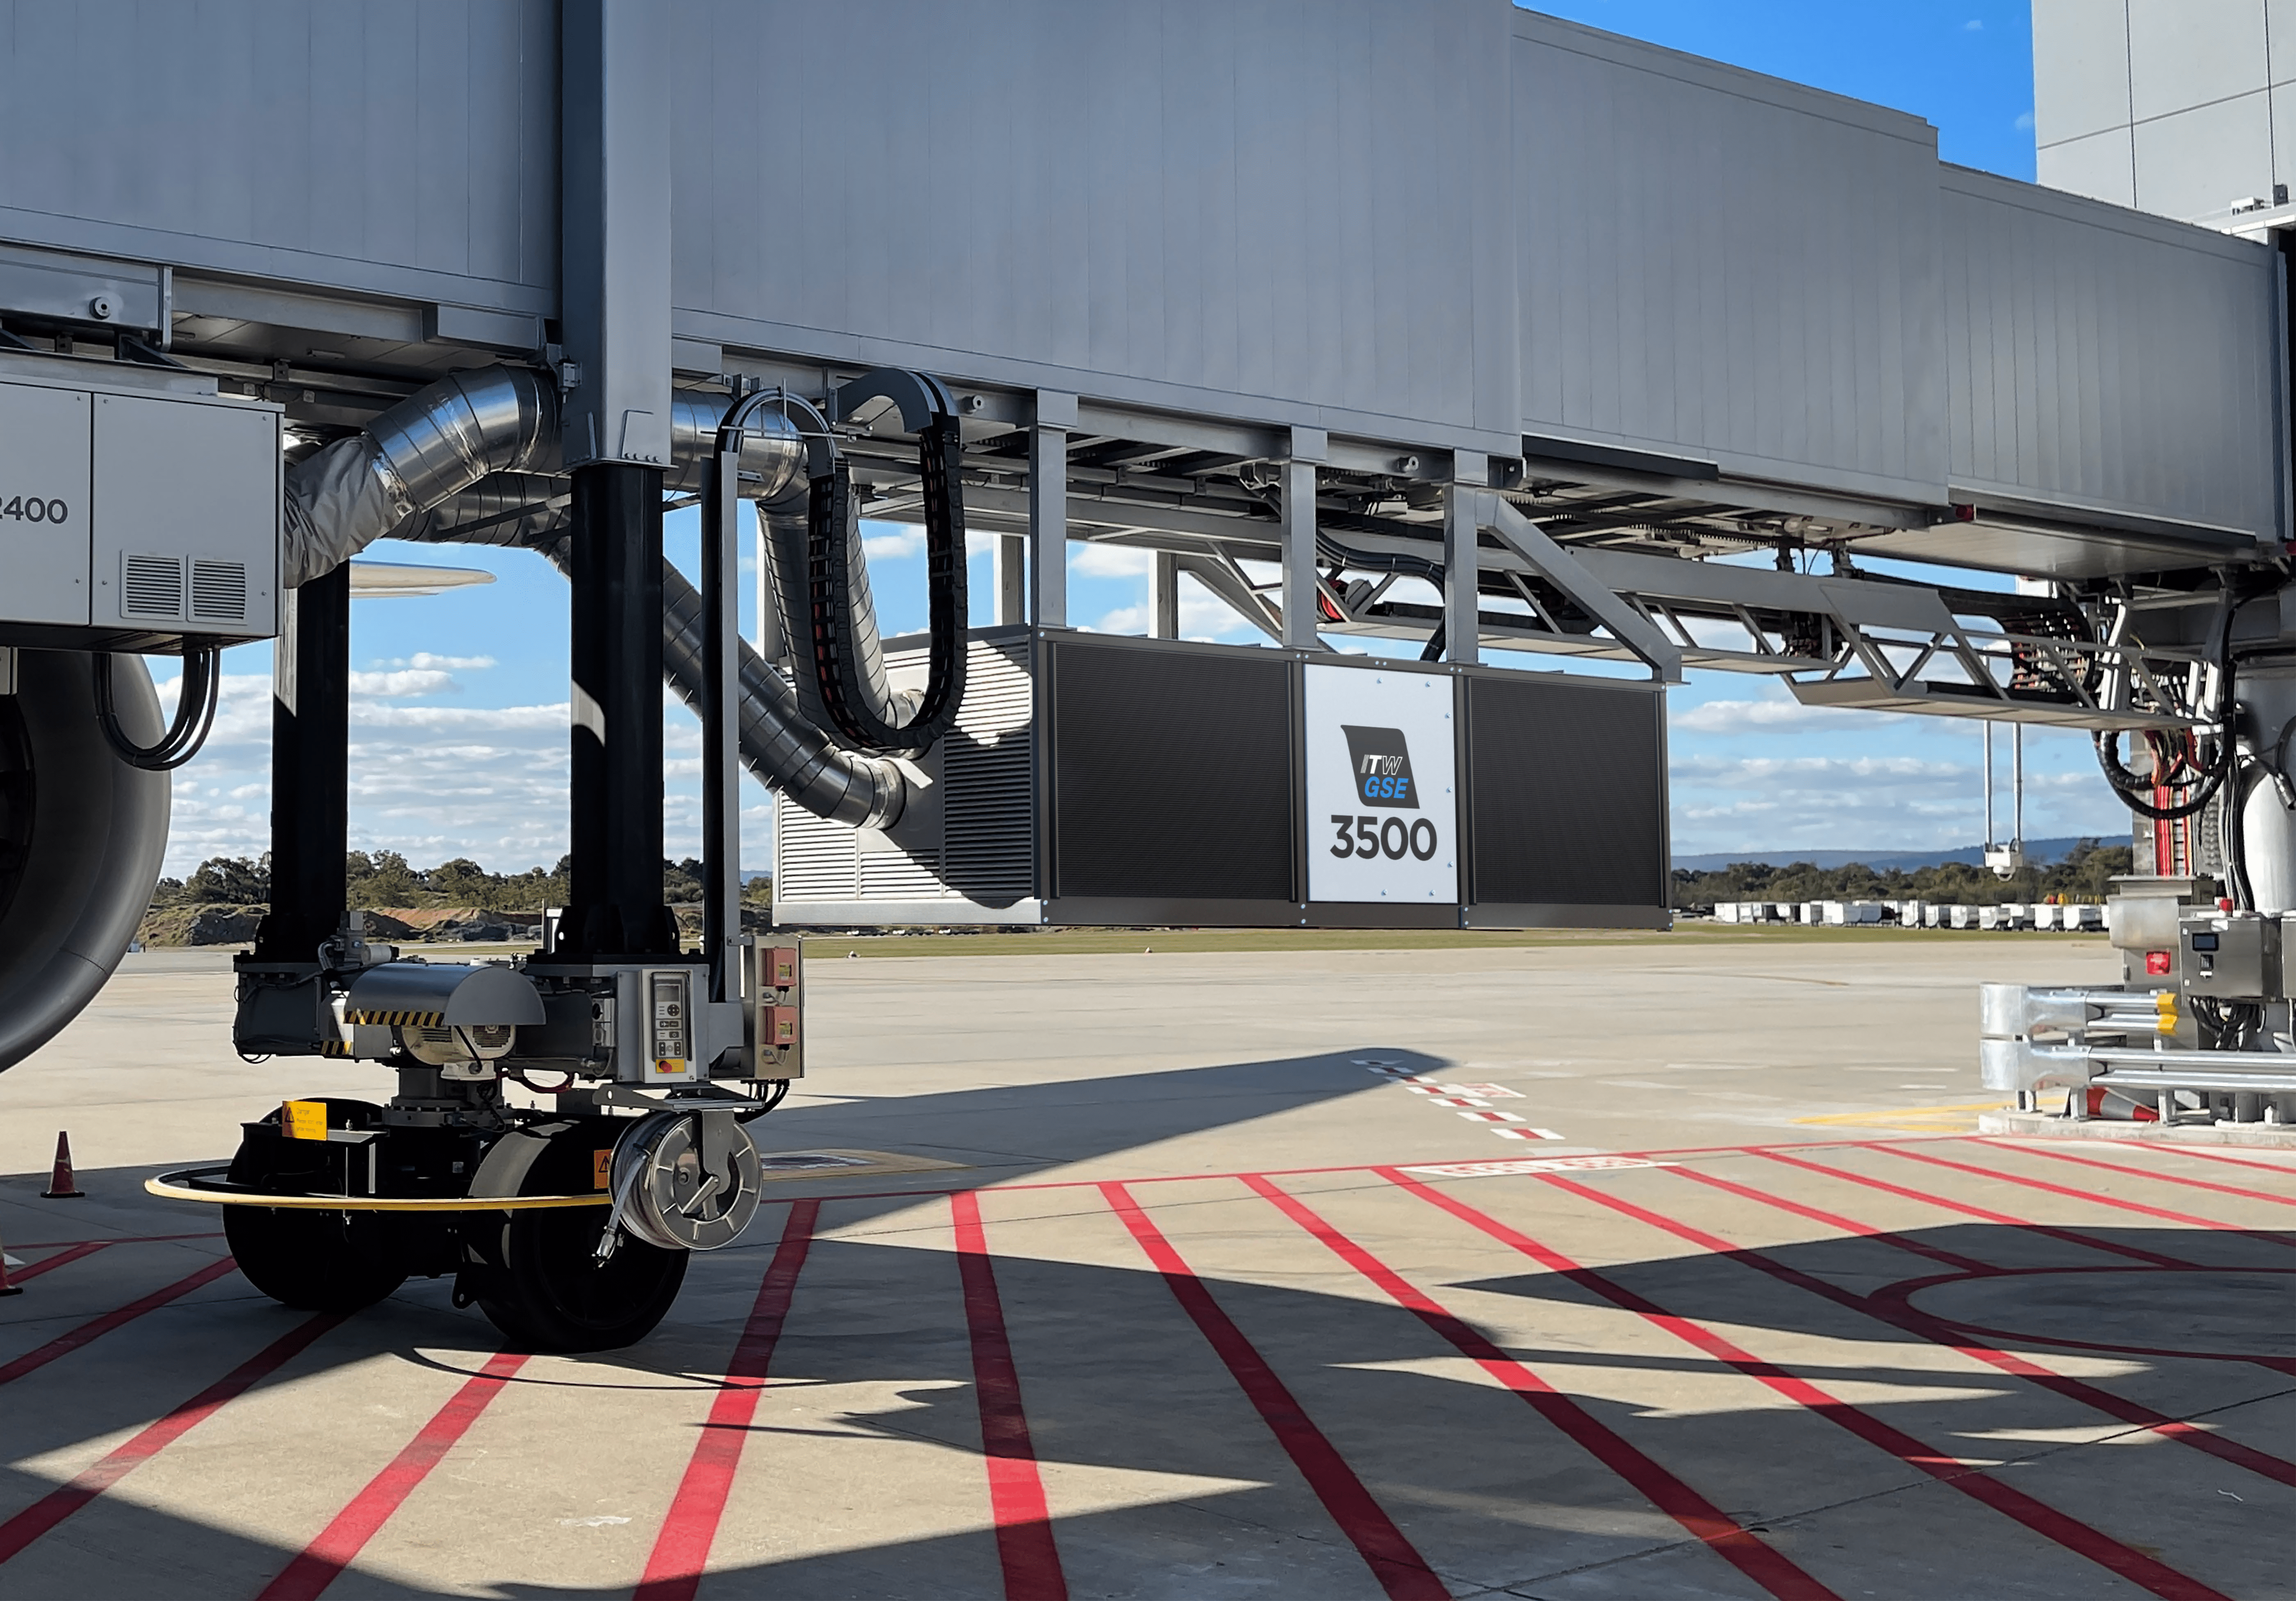 EcoGate for Airports is a high-efficiency system of ITW GSE ground support units that work together intelligently. The 3500 PCA is the brain behind the visionary approach to advancing gate economics.